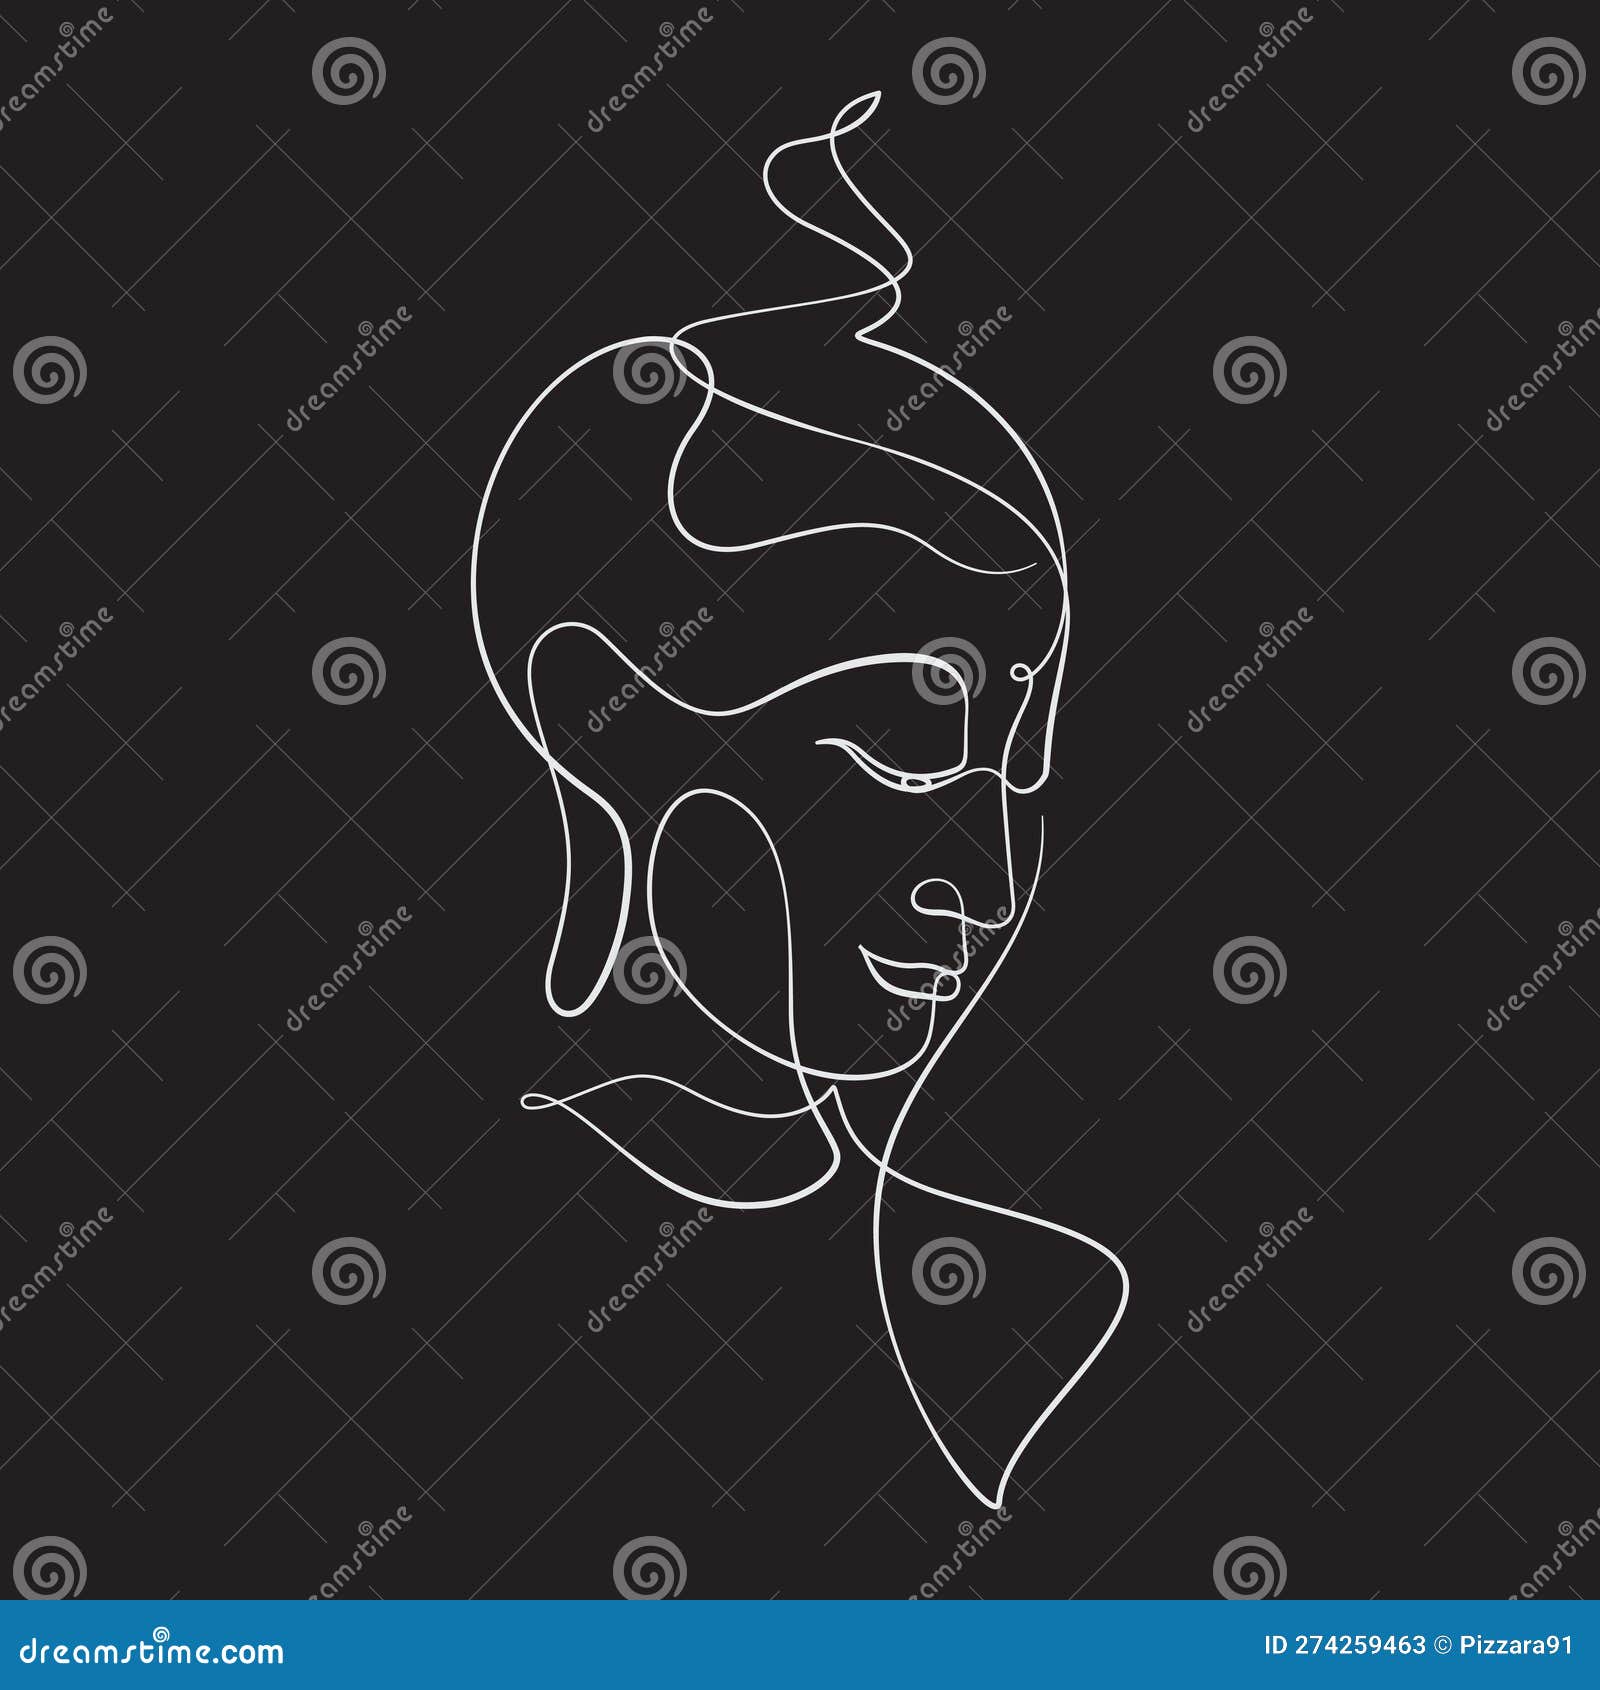 Sketch with buddha drawing Royalty Free Vector Image